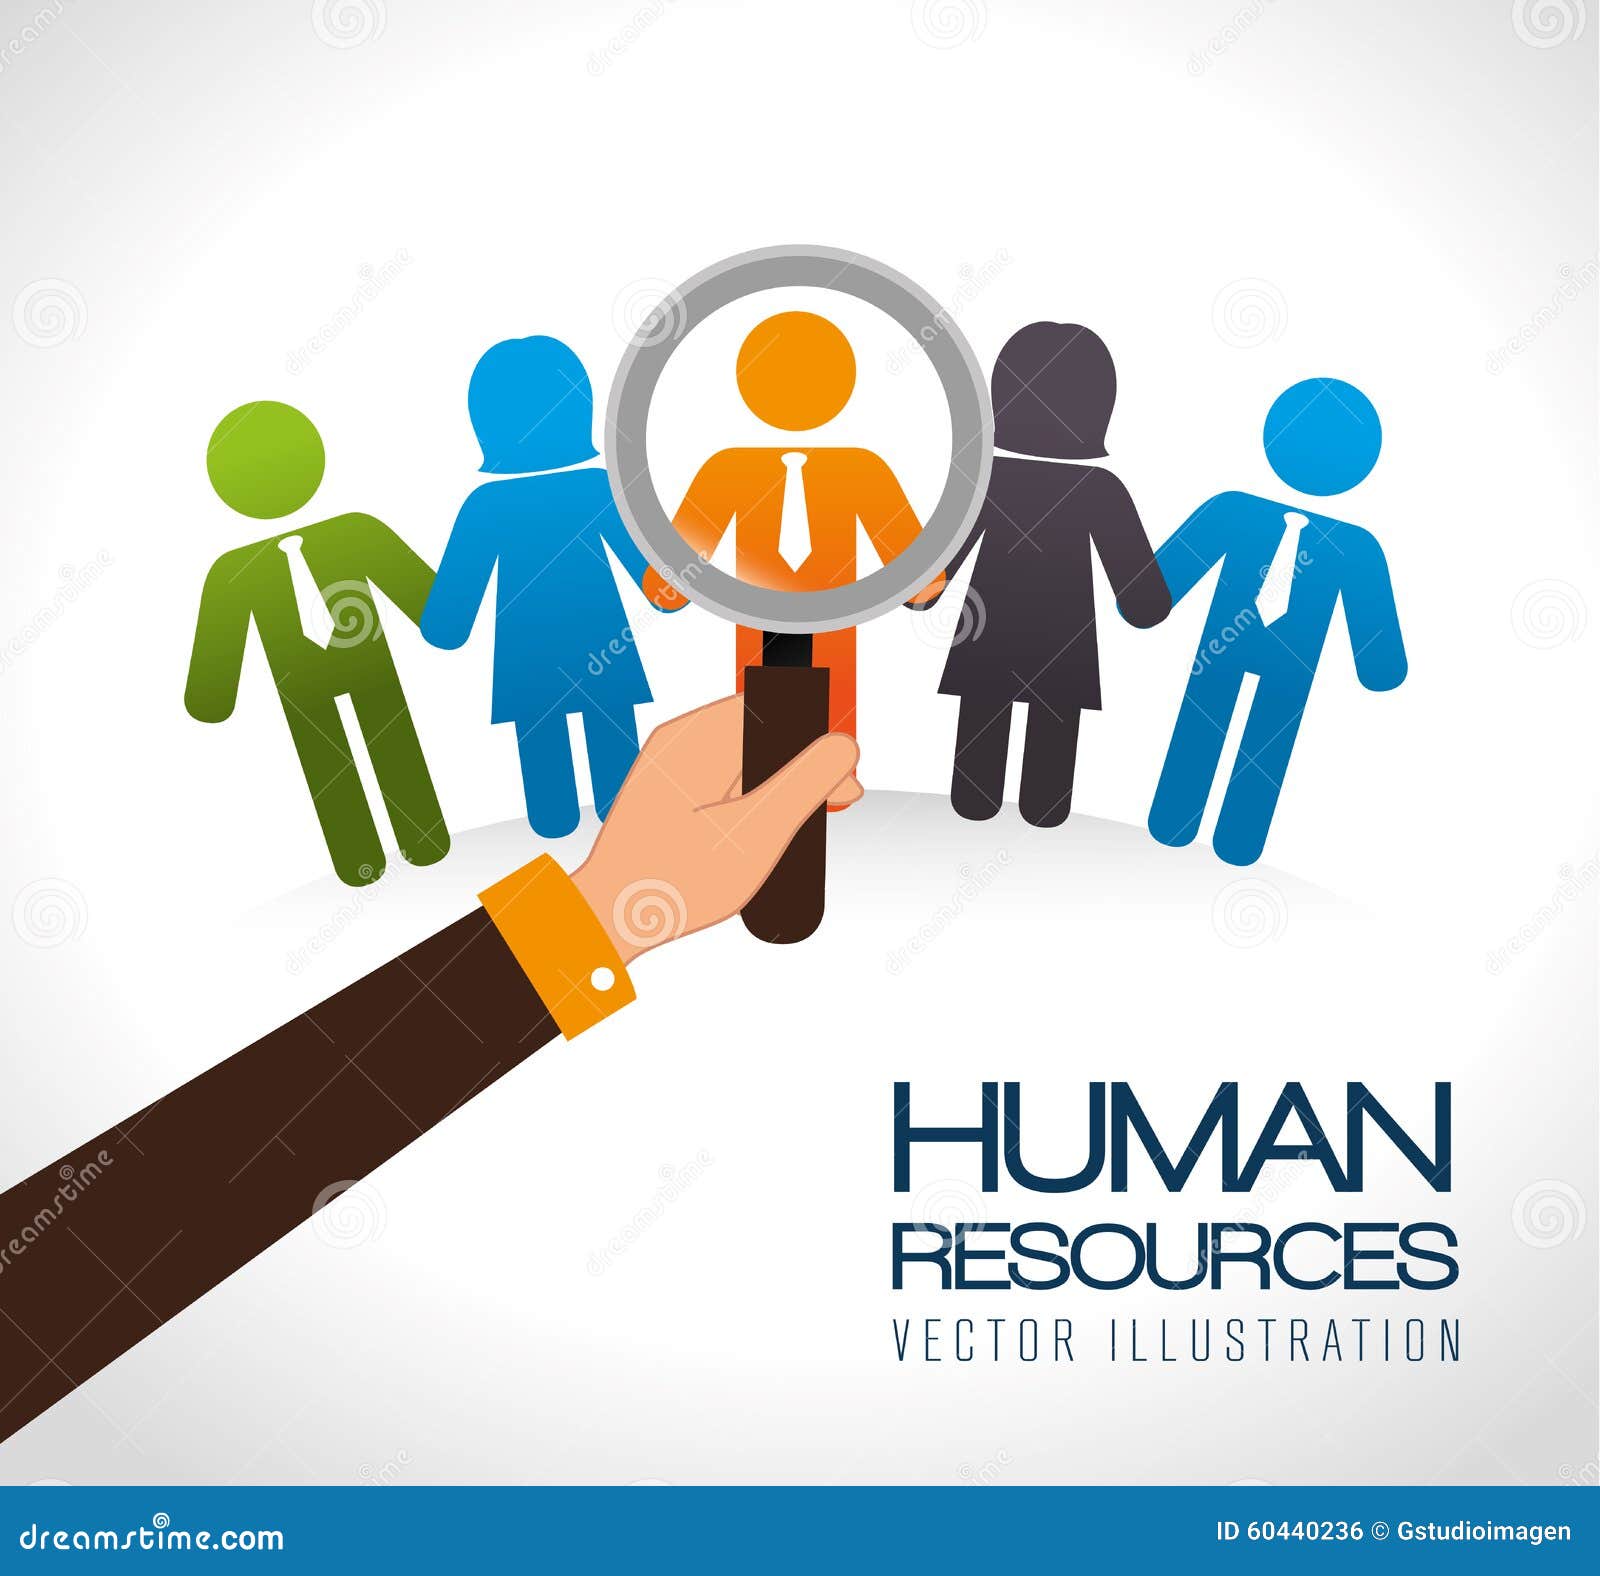 Human Resources Design. Stock Vector Image 60440236